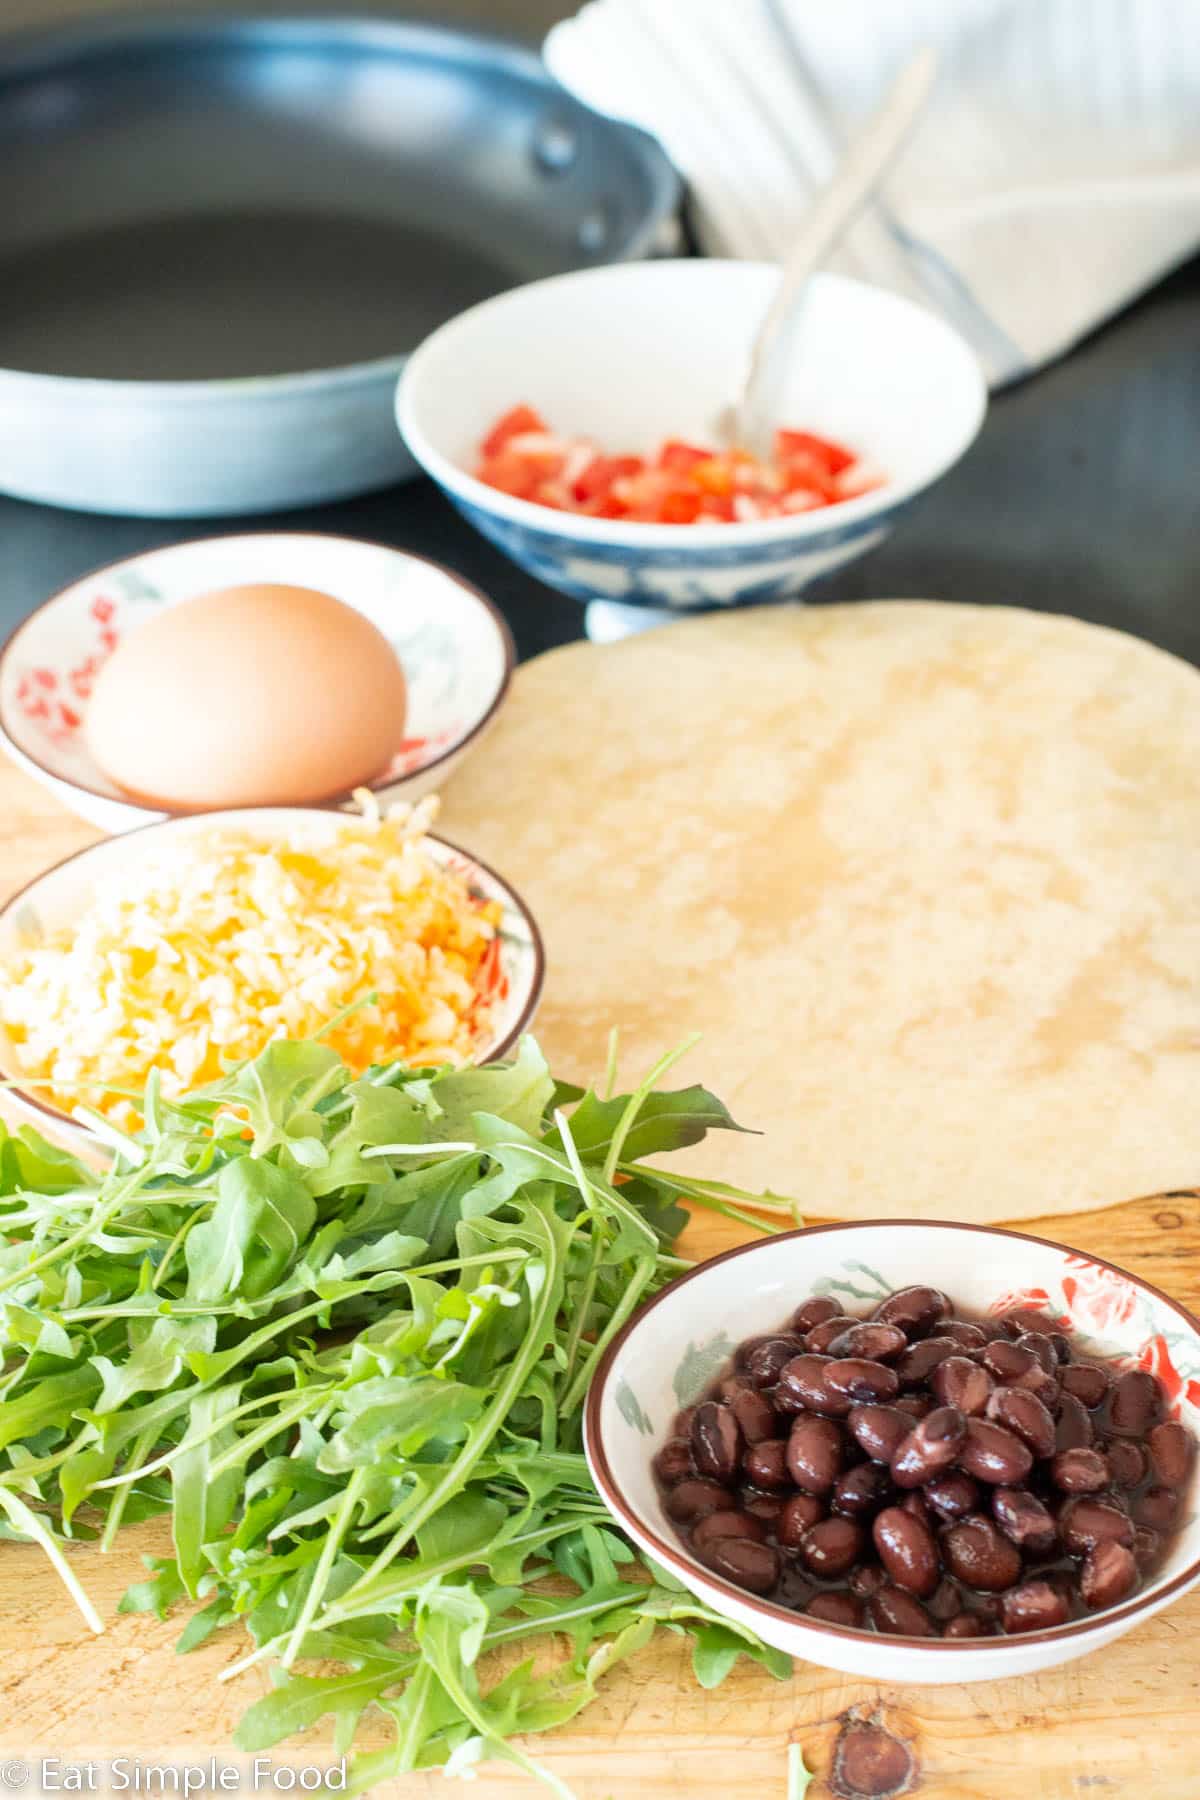 Ingredients on a wood cutting board with a nonstick skillet and napkin in background. Ingredients: tomato salsa, whole egg in shell, shredded yellow cheese, handful of arugula, small ramiken of black beans.